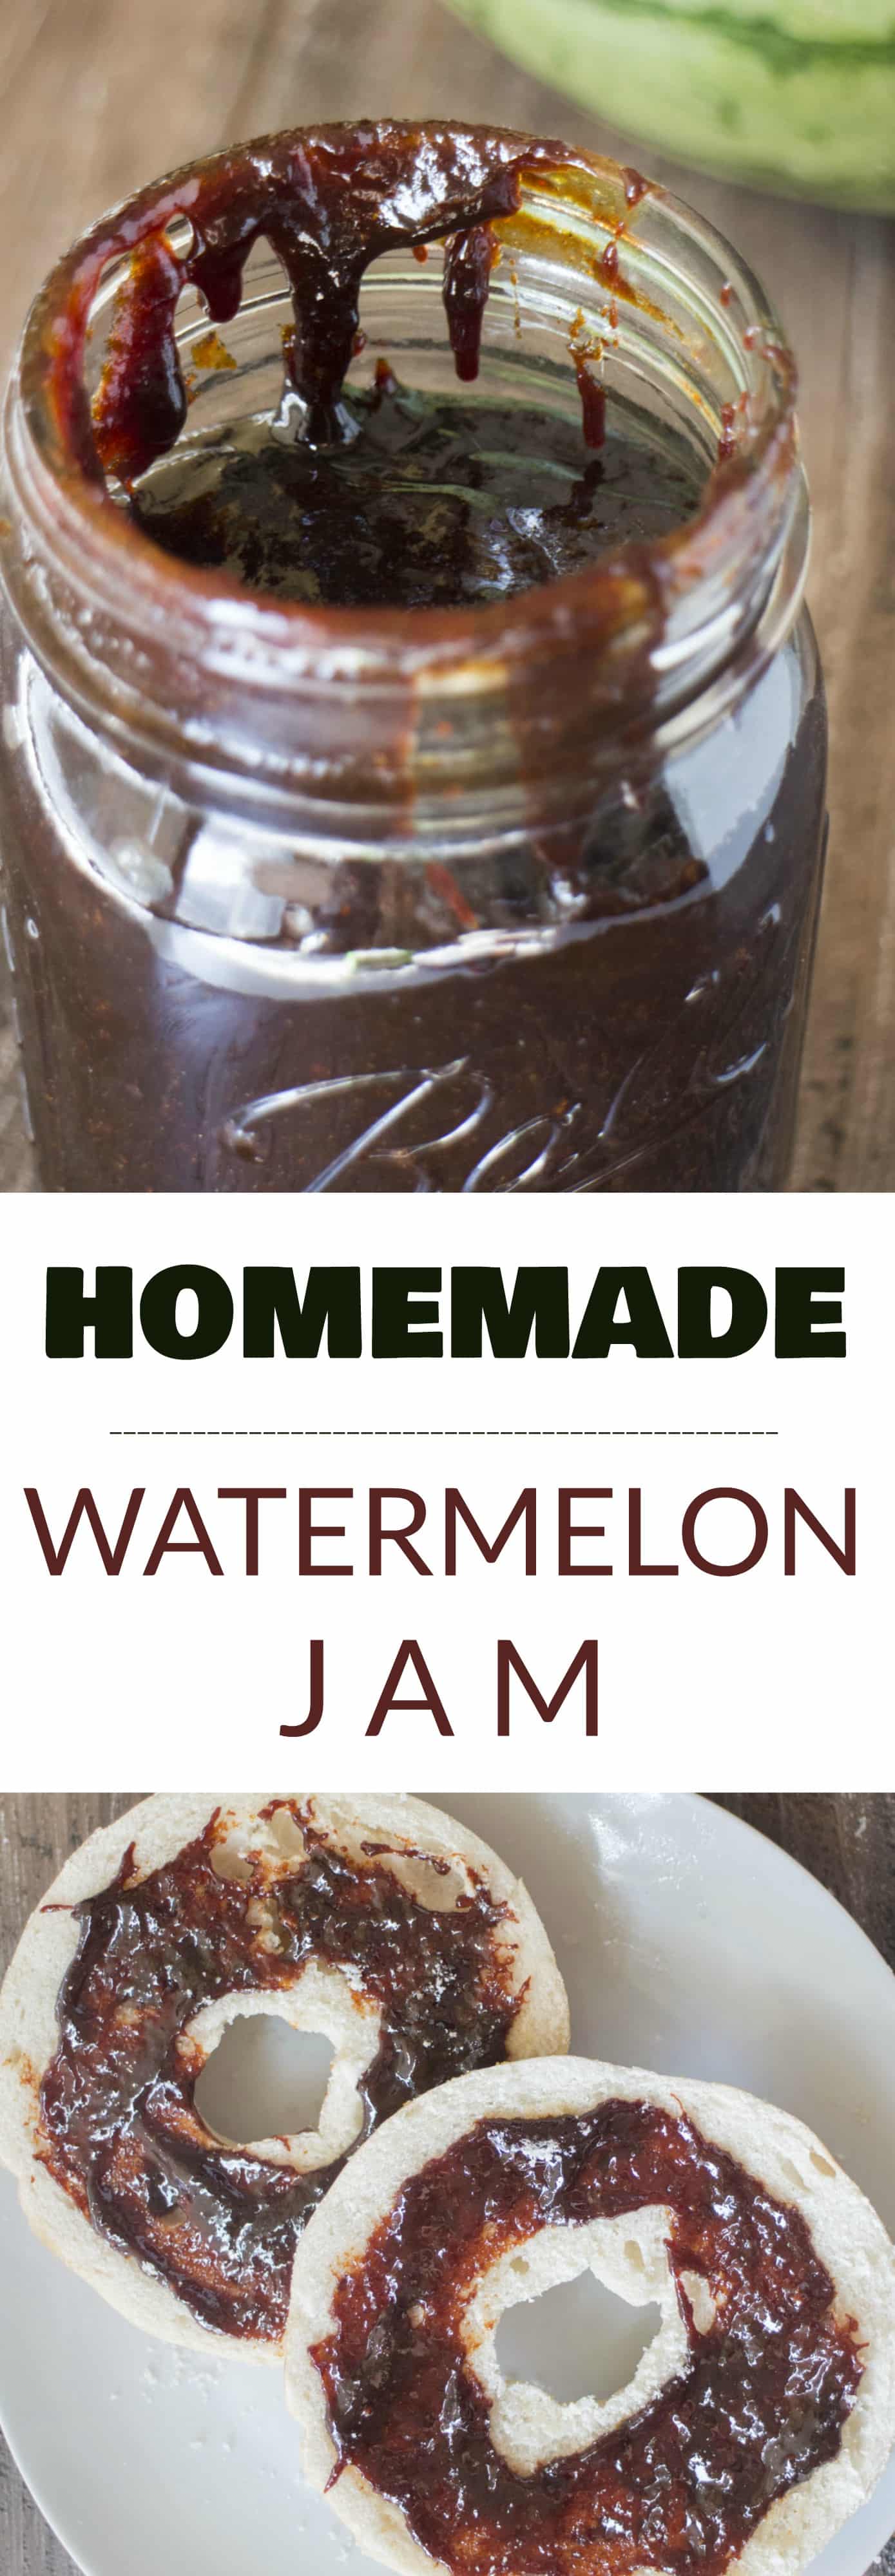 HOMEMADE Watermelon Jam! This easy to make jam recipe uses fresh watermelon juice to make a healthy jam. No pectin is needed for this recipe, just throw it in the refrigerator when it's done! This is one of the best fruit jams, I love eating it on toast!